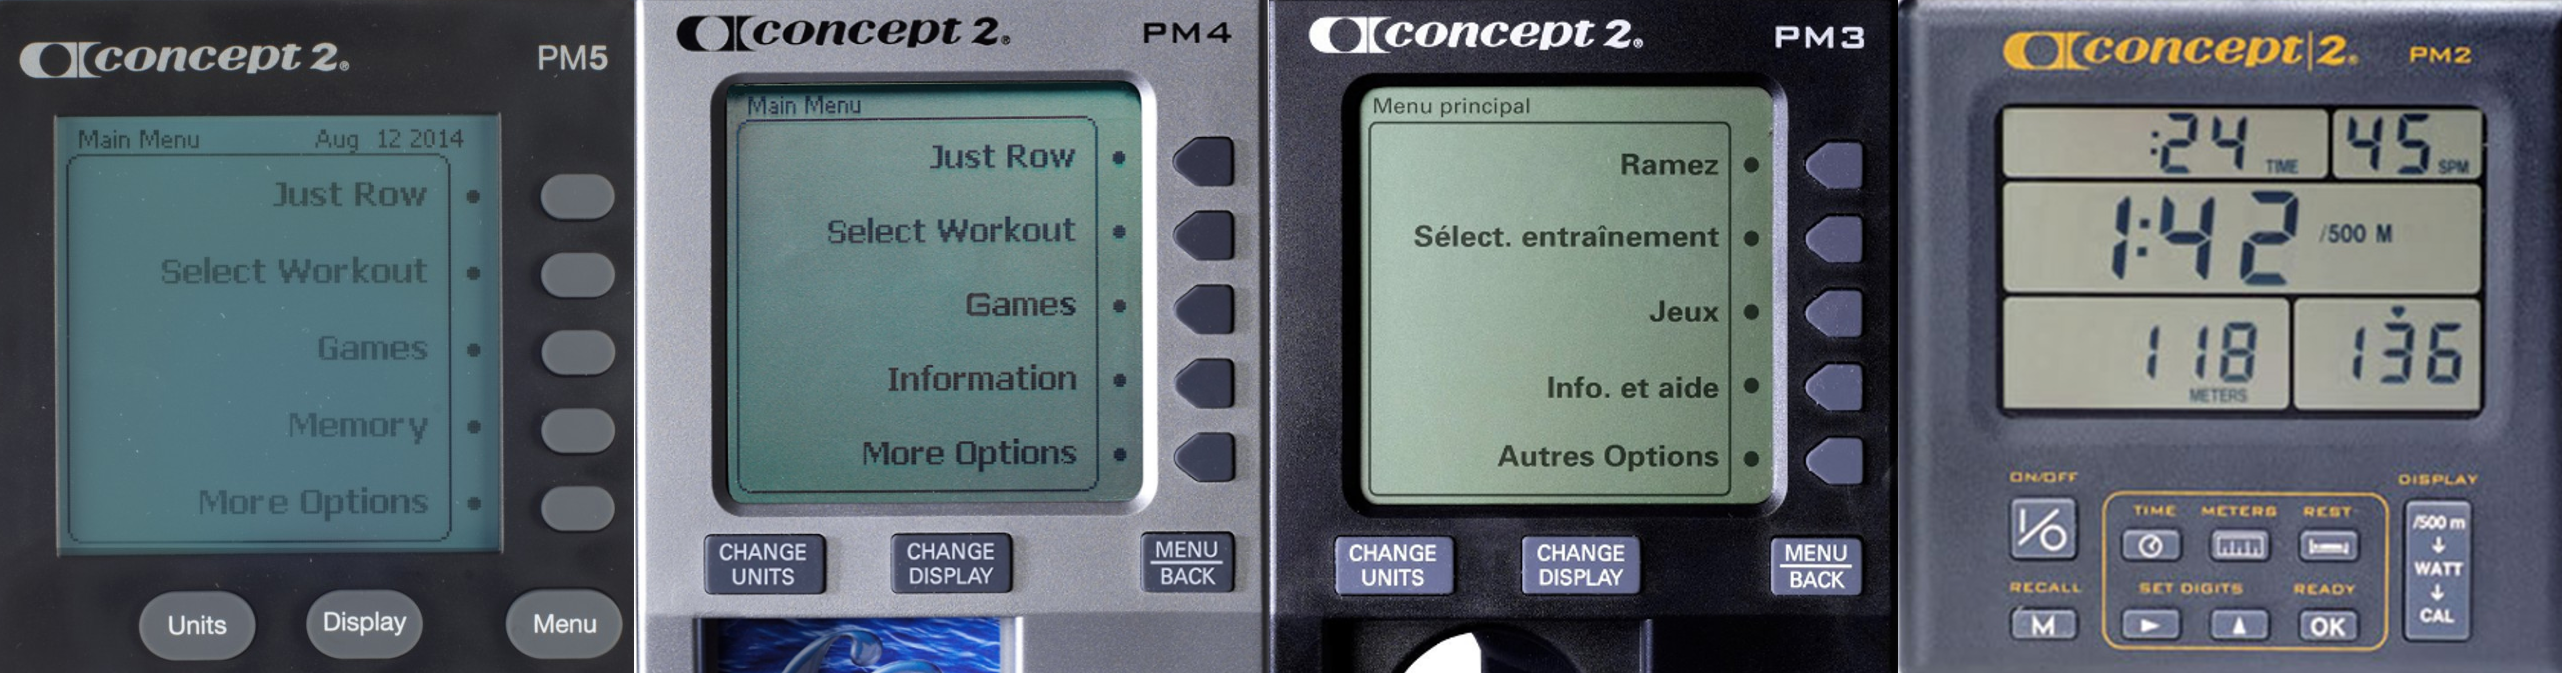 How to upgrade your Concept2 indoor rower to a PM5 today